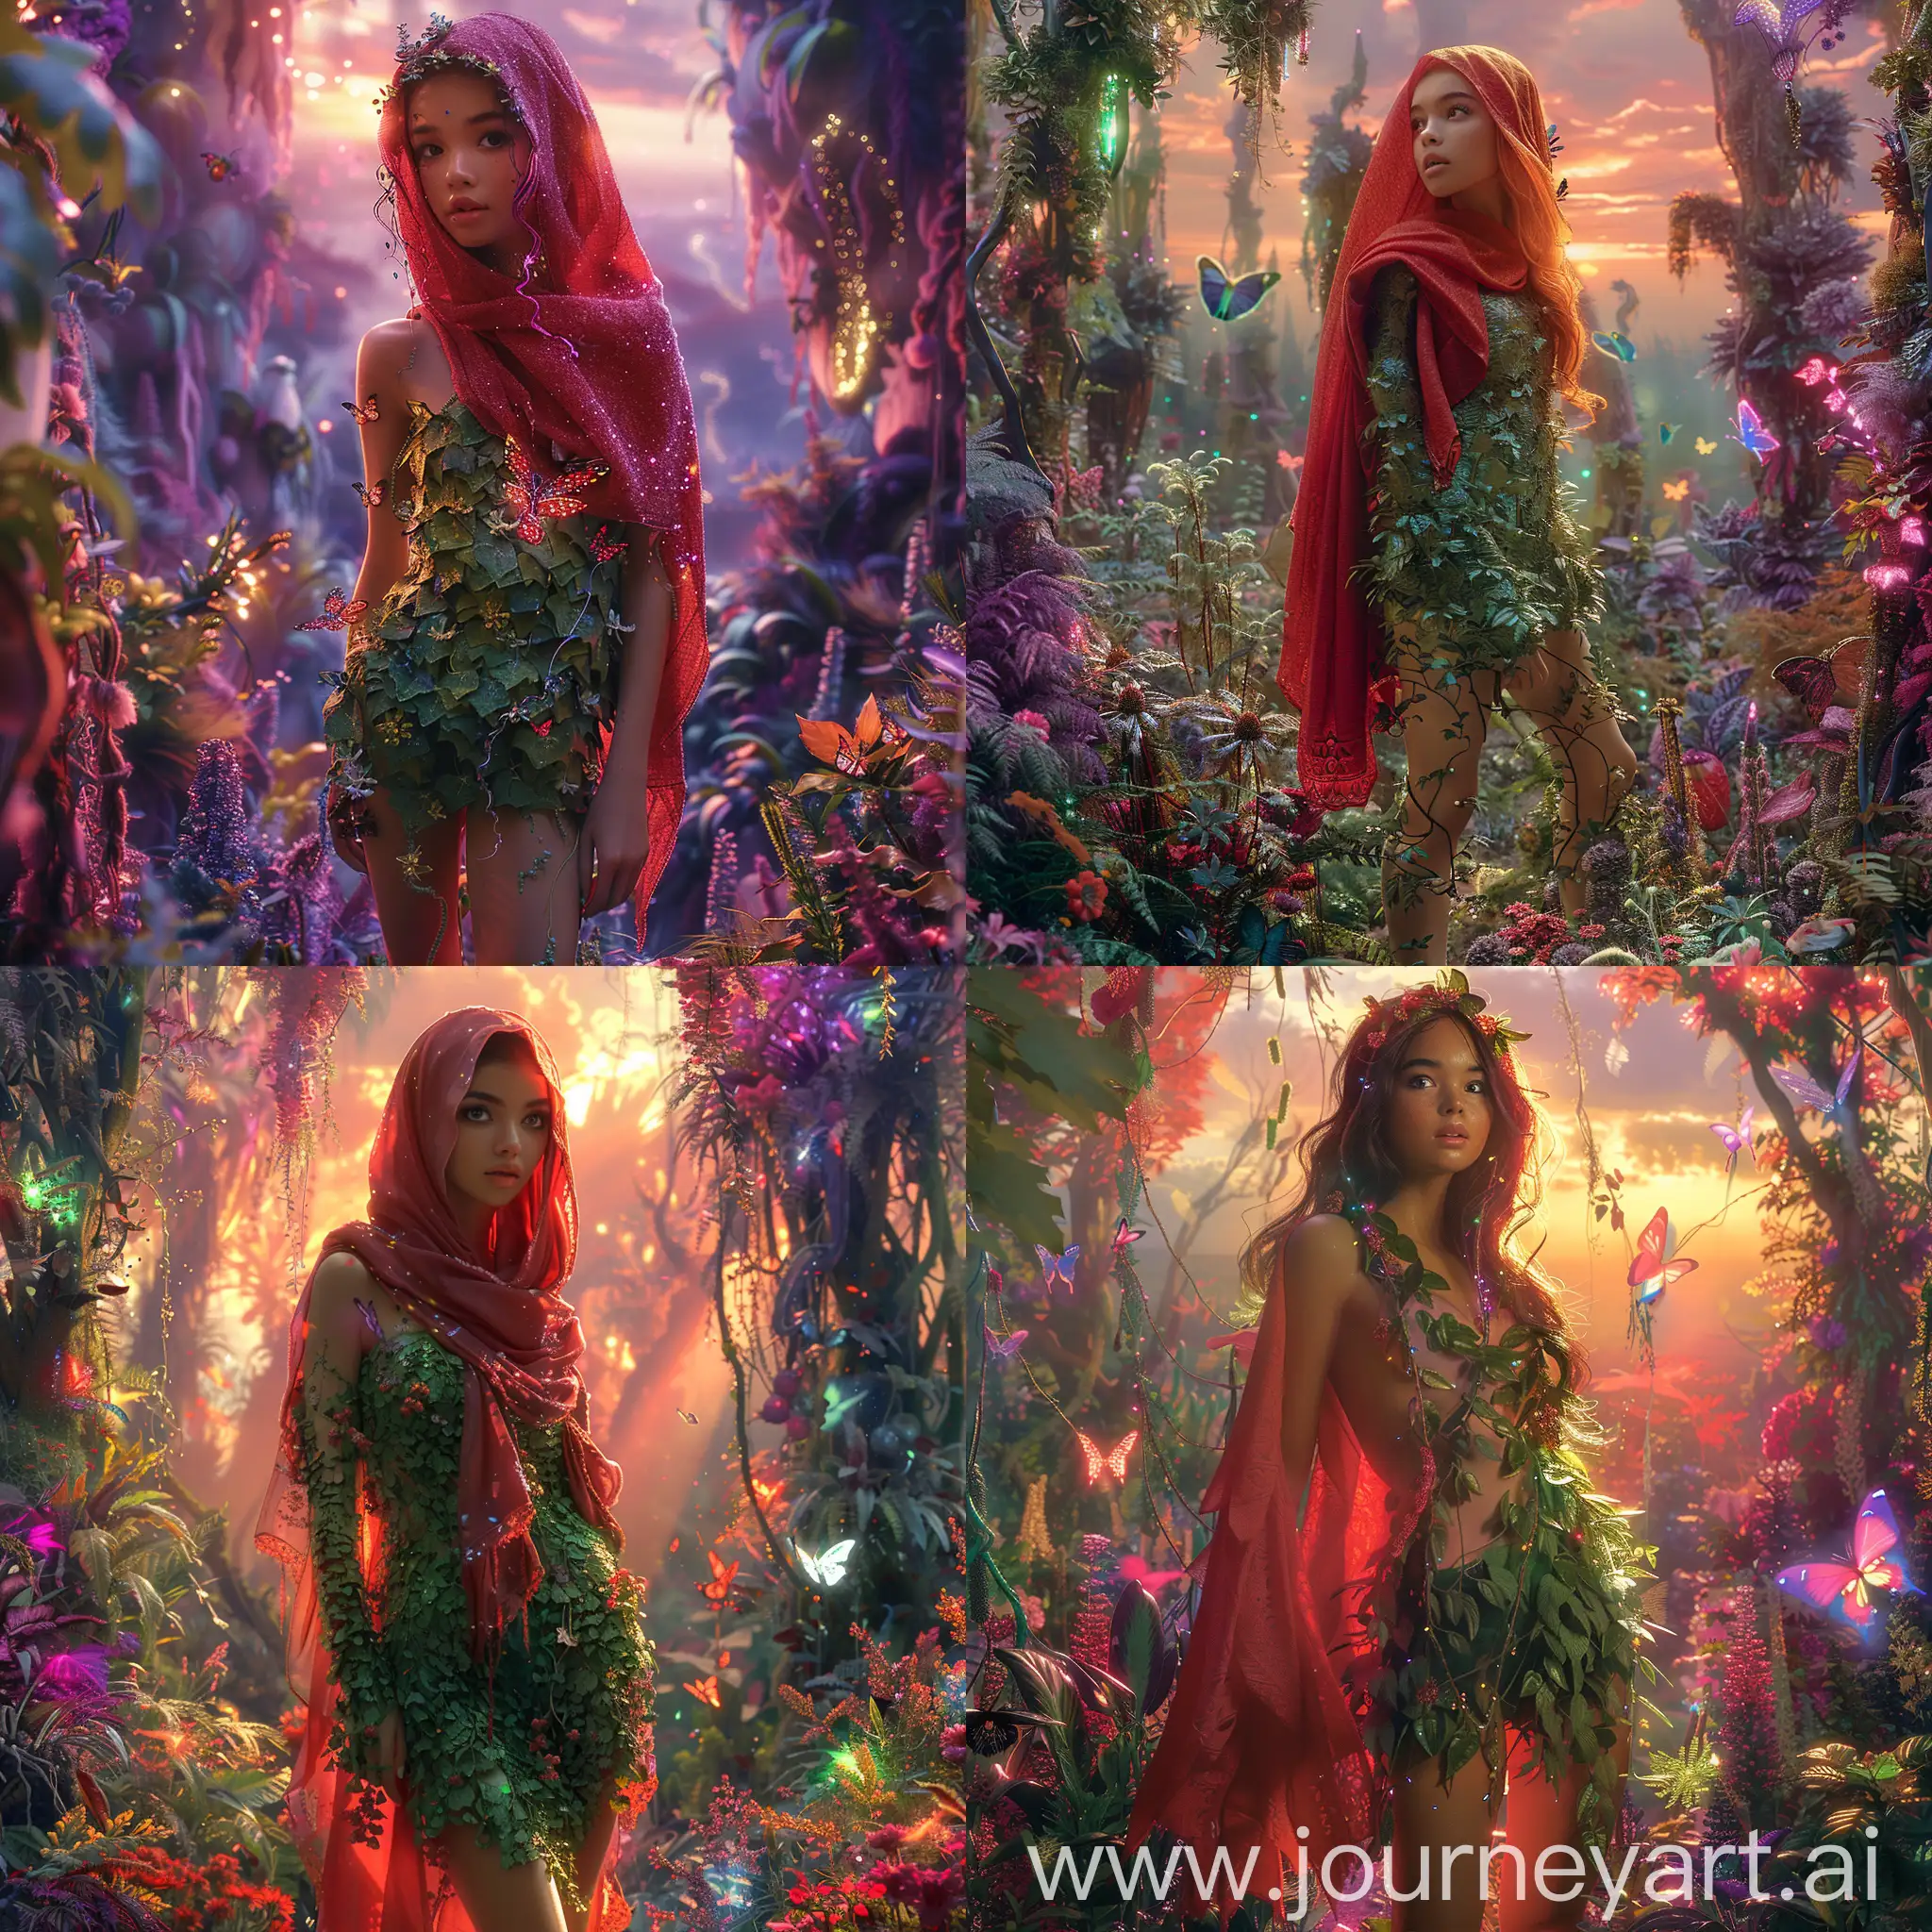 a beautiful muslimah with short red shawl in a green dress made of tree leaves in a magical forest surrounded by colorful fantasy plants and huge neon-glowing butterflies, sunset light paints the sky in wild pink, violet and golden hues, ethereal beauty, Nancy Noel, Luis Royo --s 500 